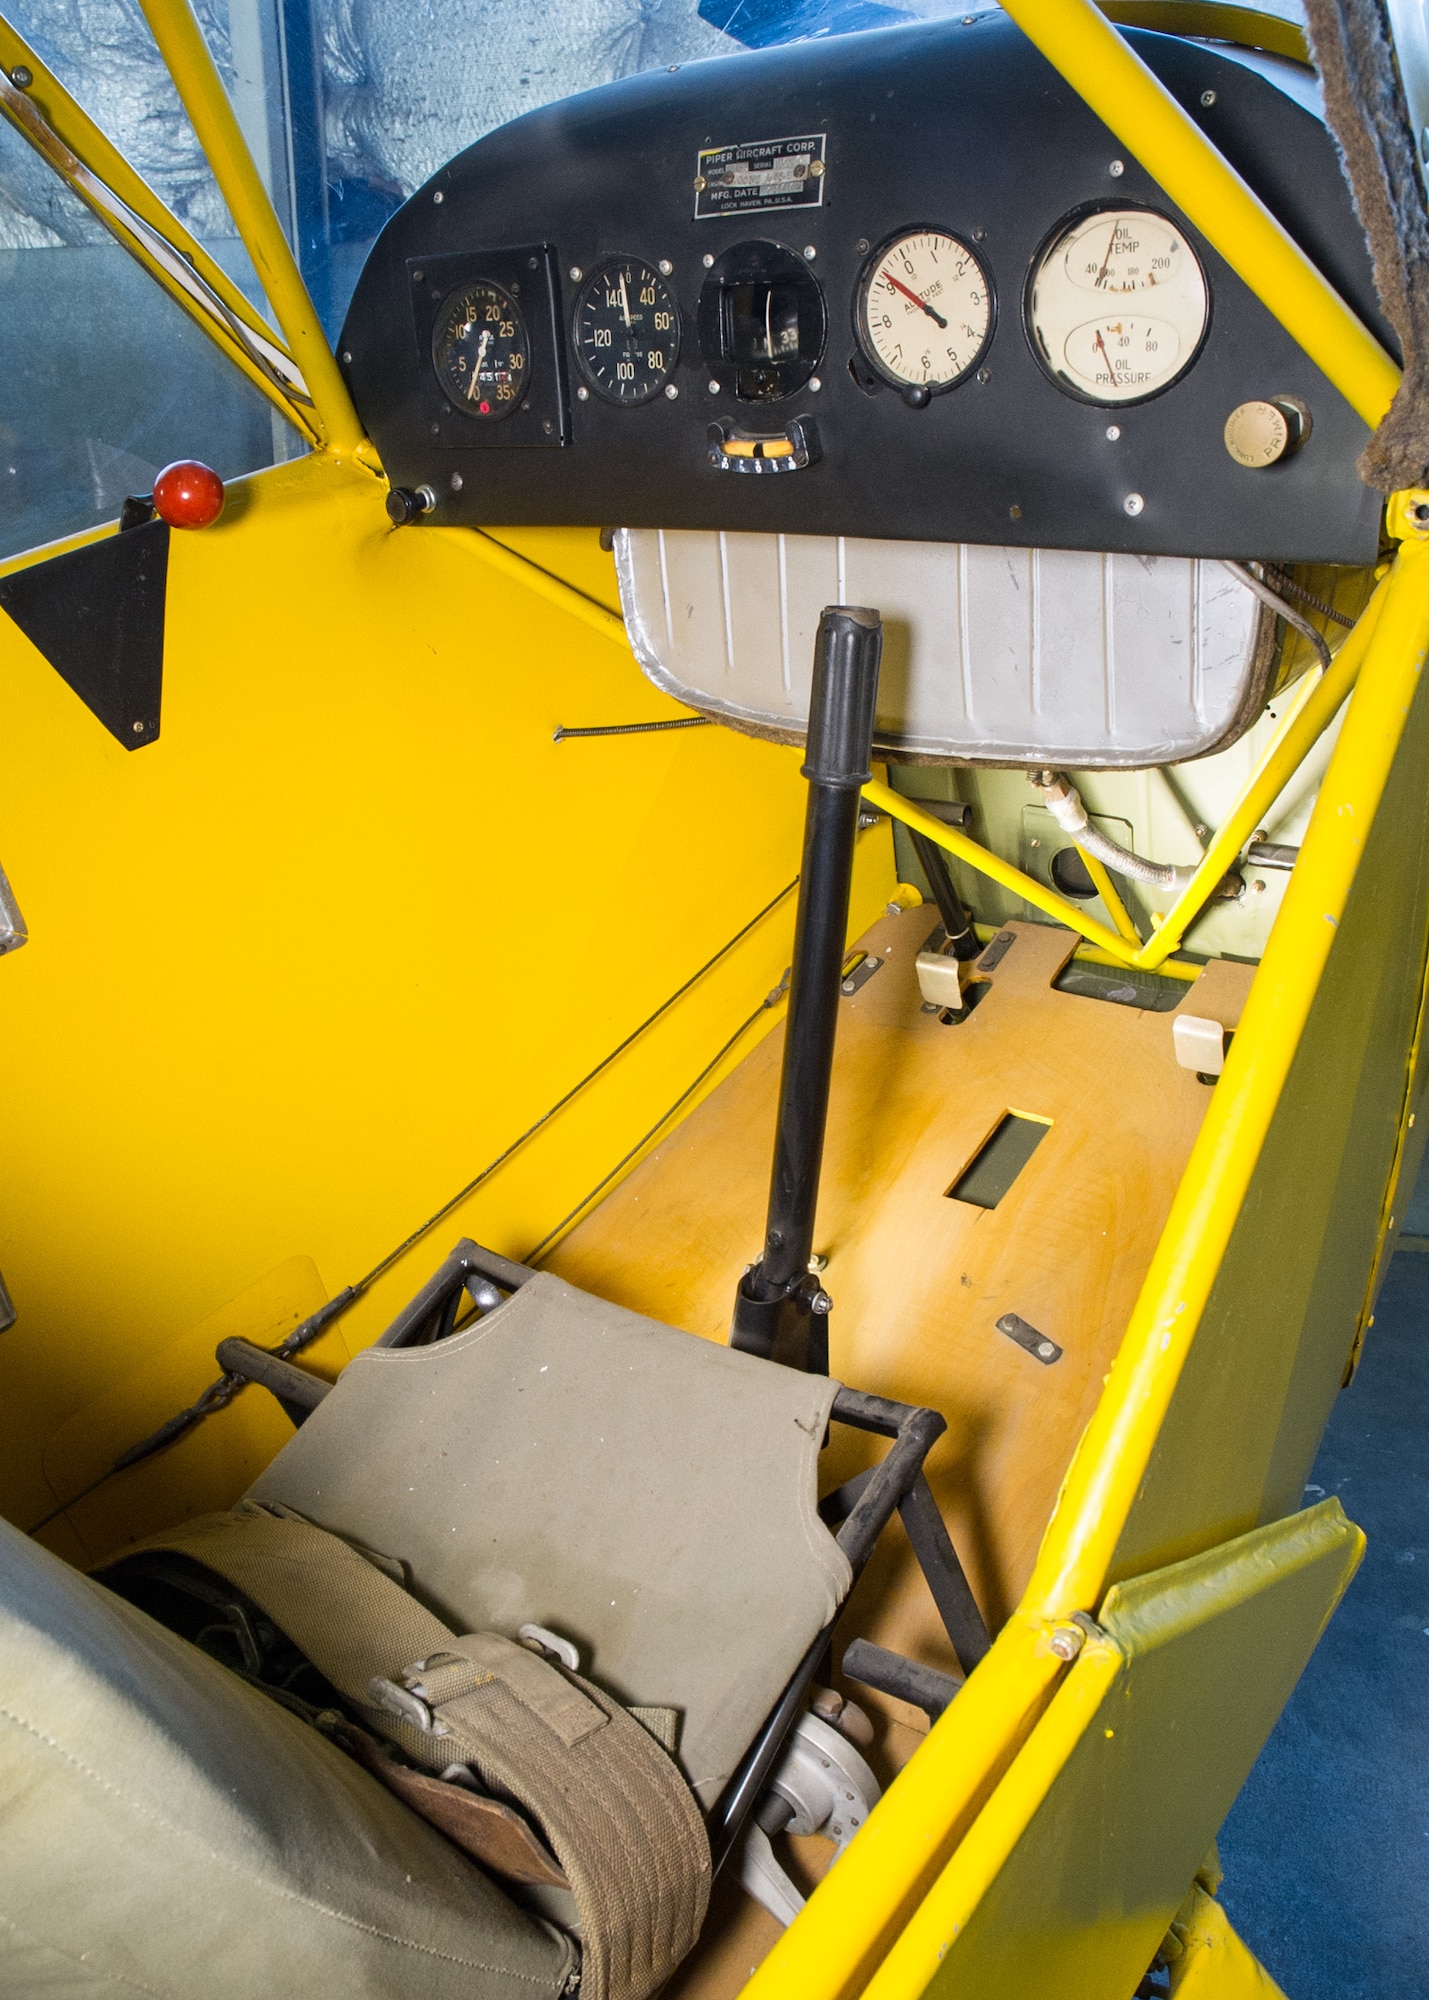 DAYTON, Ohio -- Piper J-3C-65-8 cockpit view at the National Museum of the United States Air Force. (U.S. Air Force photo by Ken LaRock)
